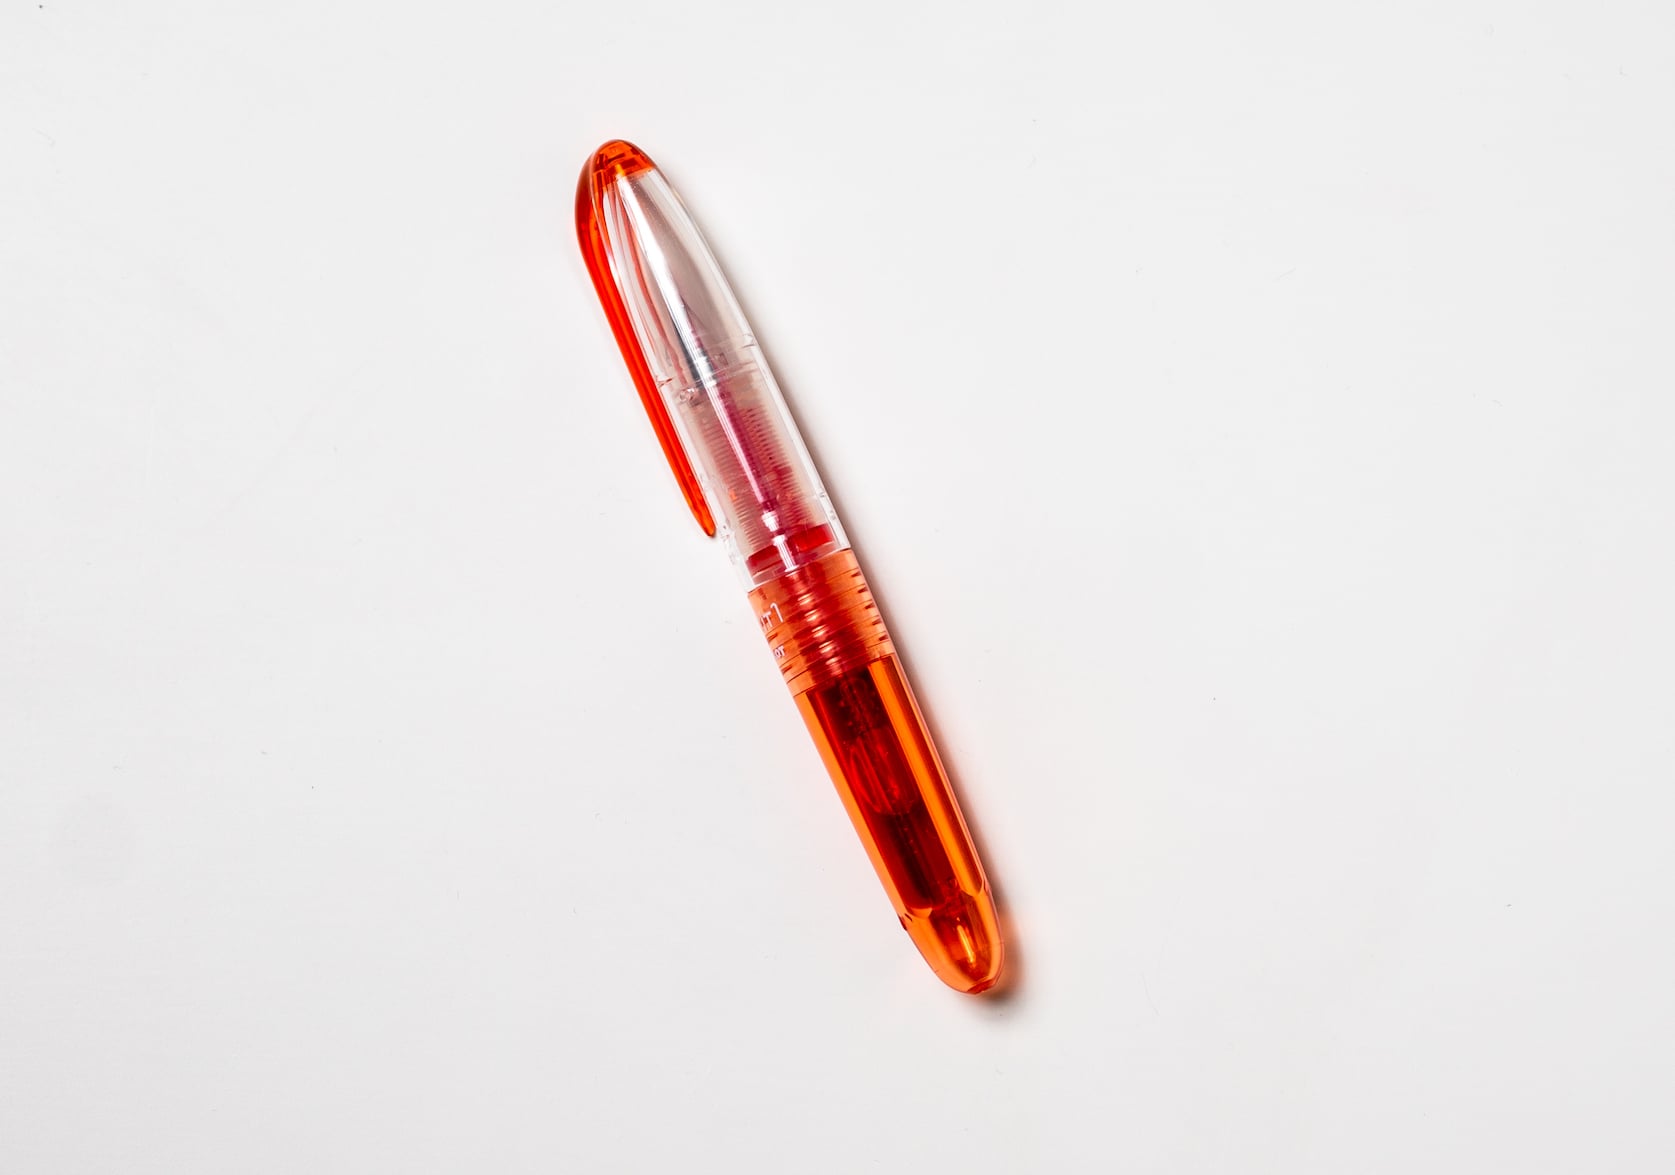 Small red fountain pen with a clear cap and red clip